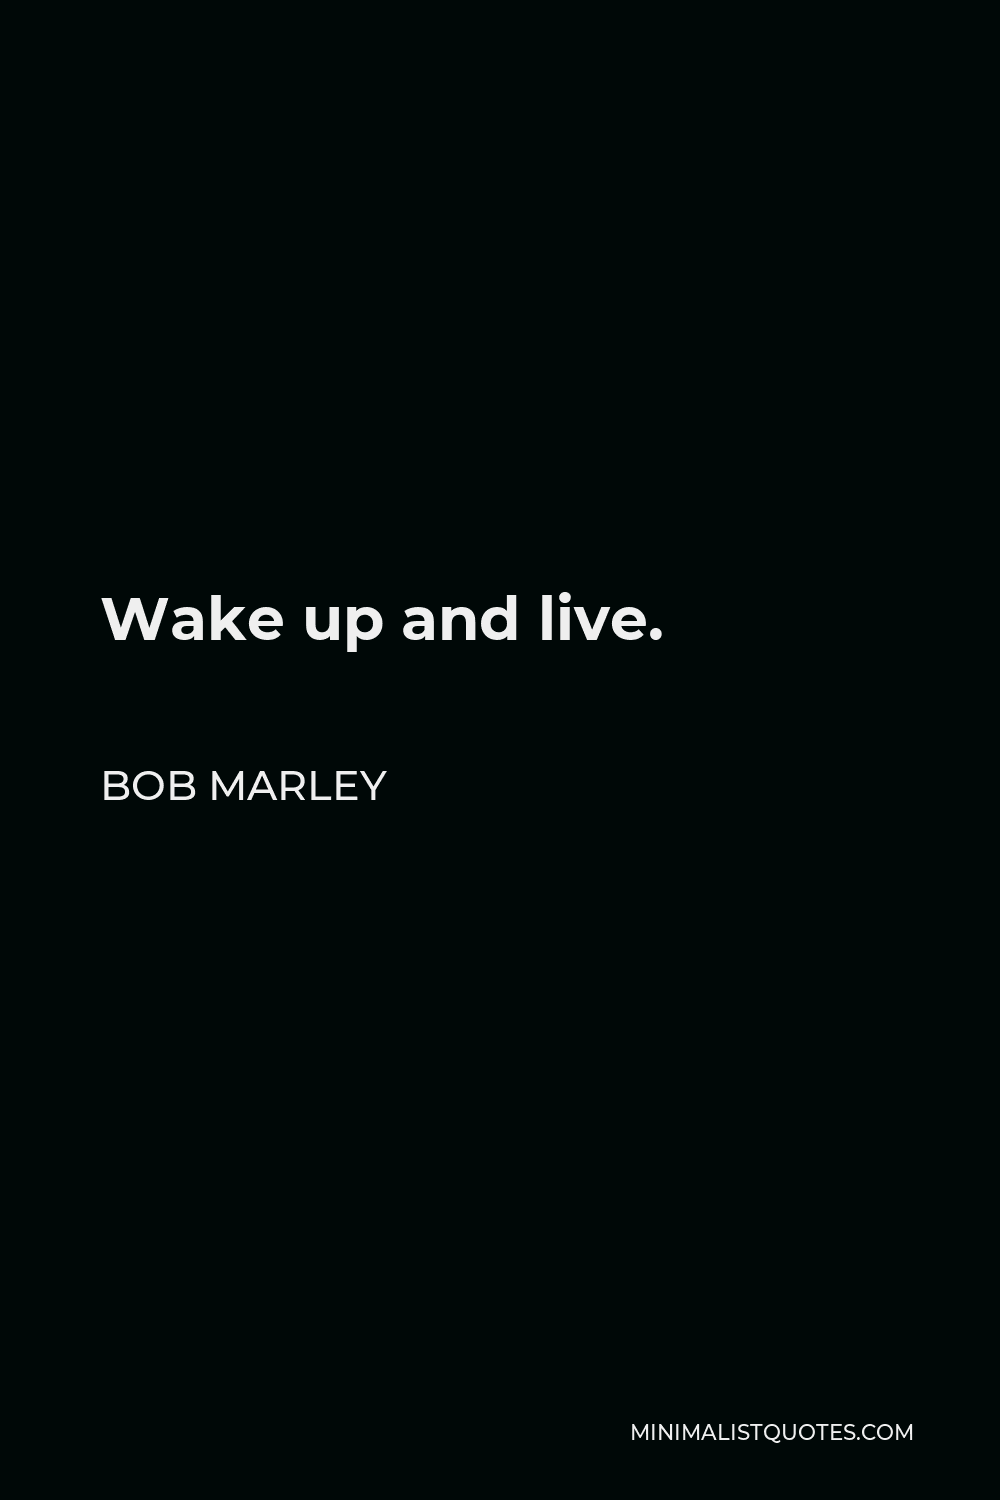 Bob Marley Quote - Wake up and live.